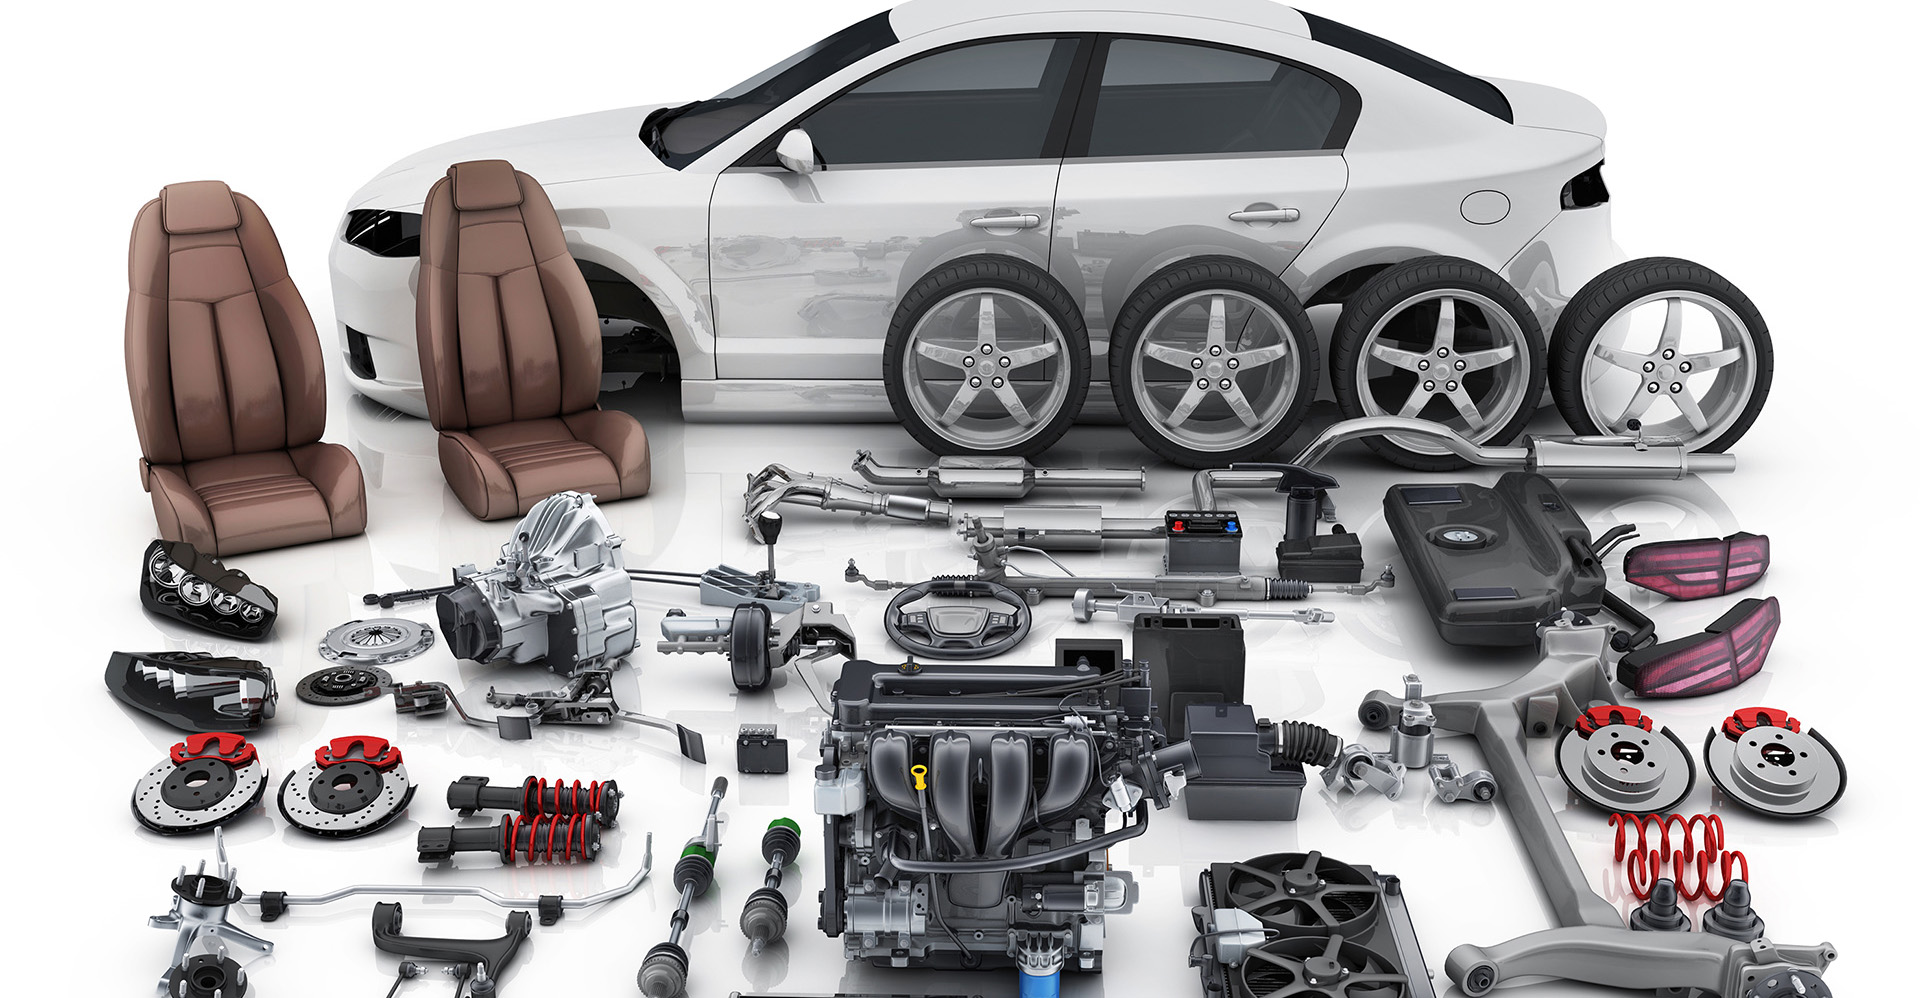 Assortment of car parts in foreground, with white four-door car in background. 